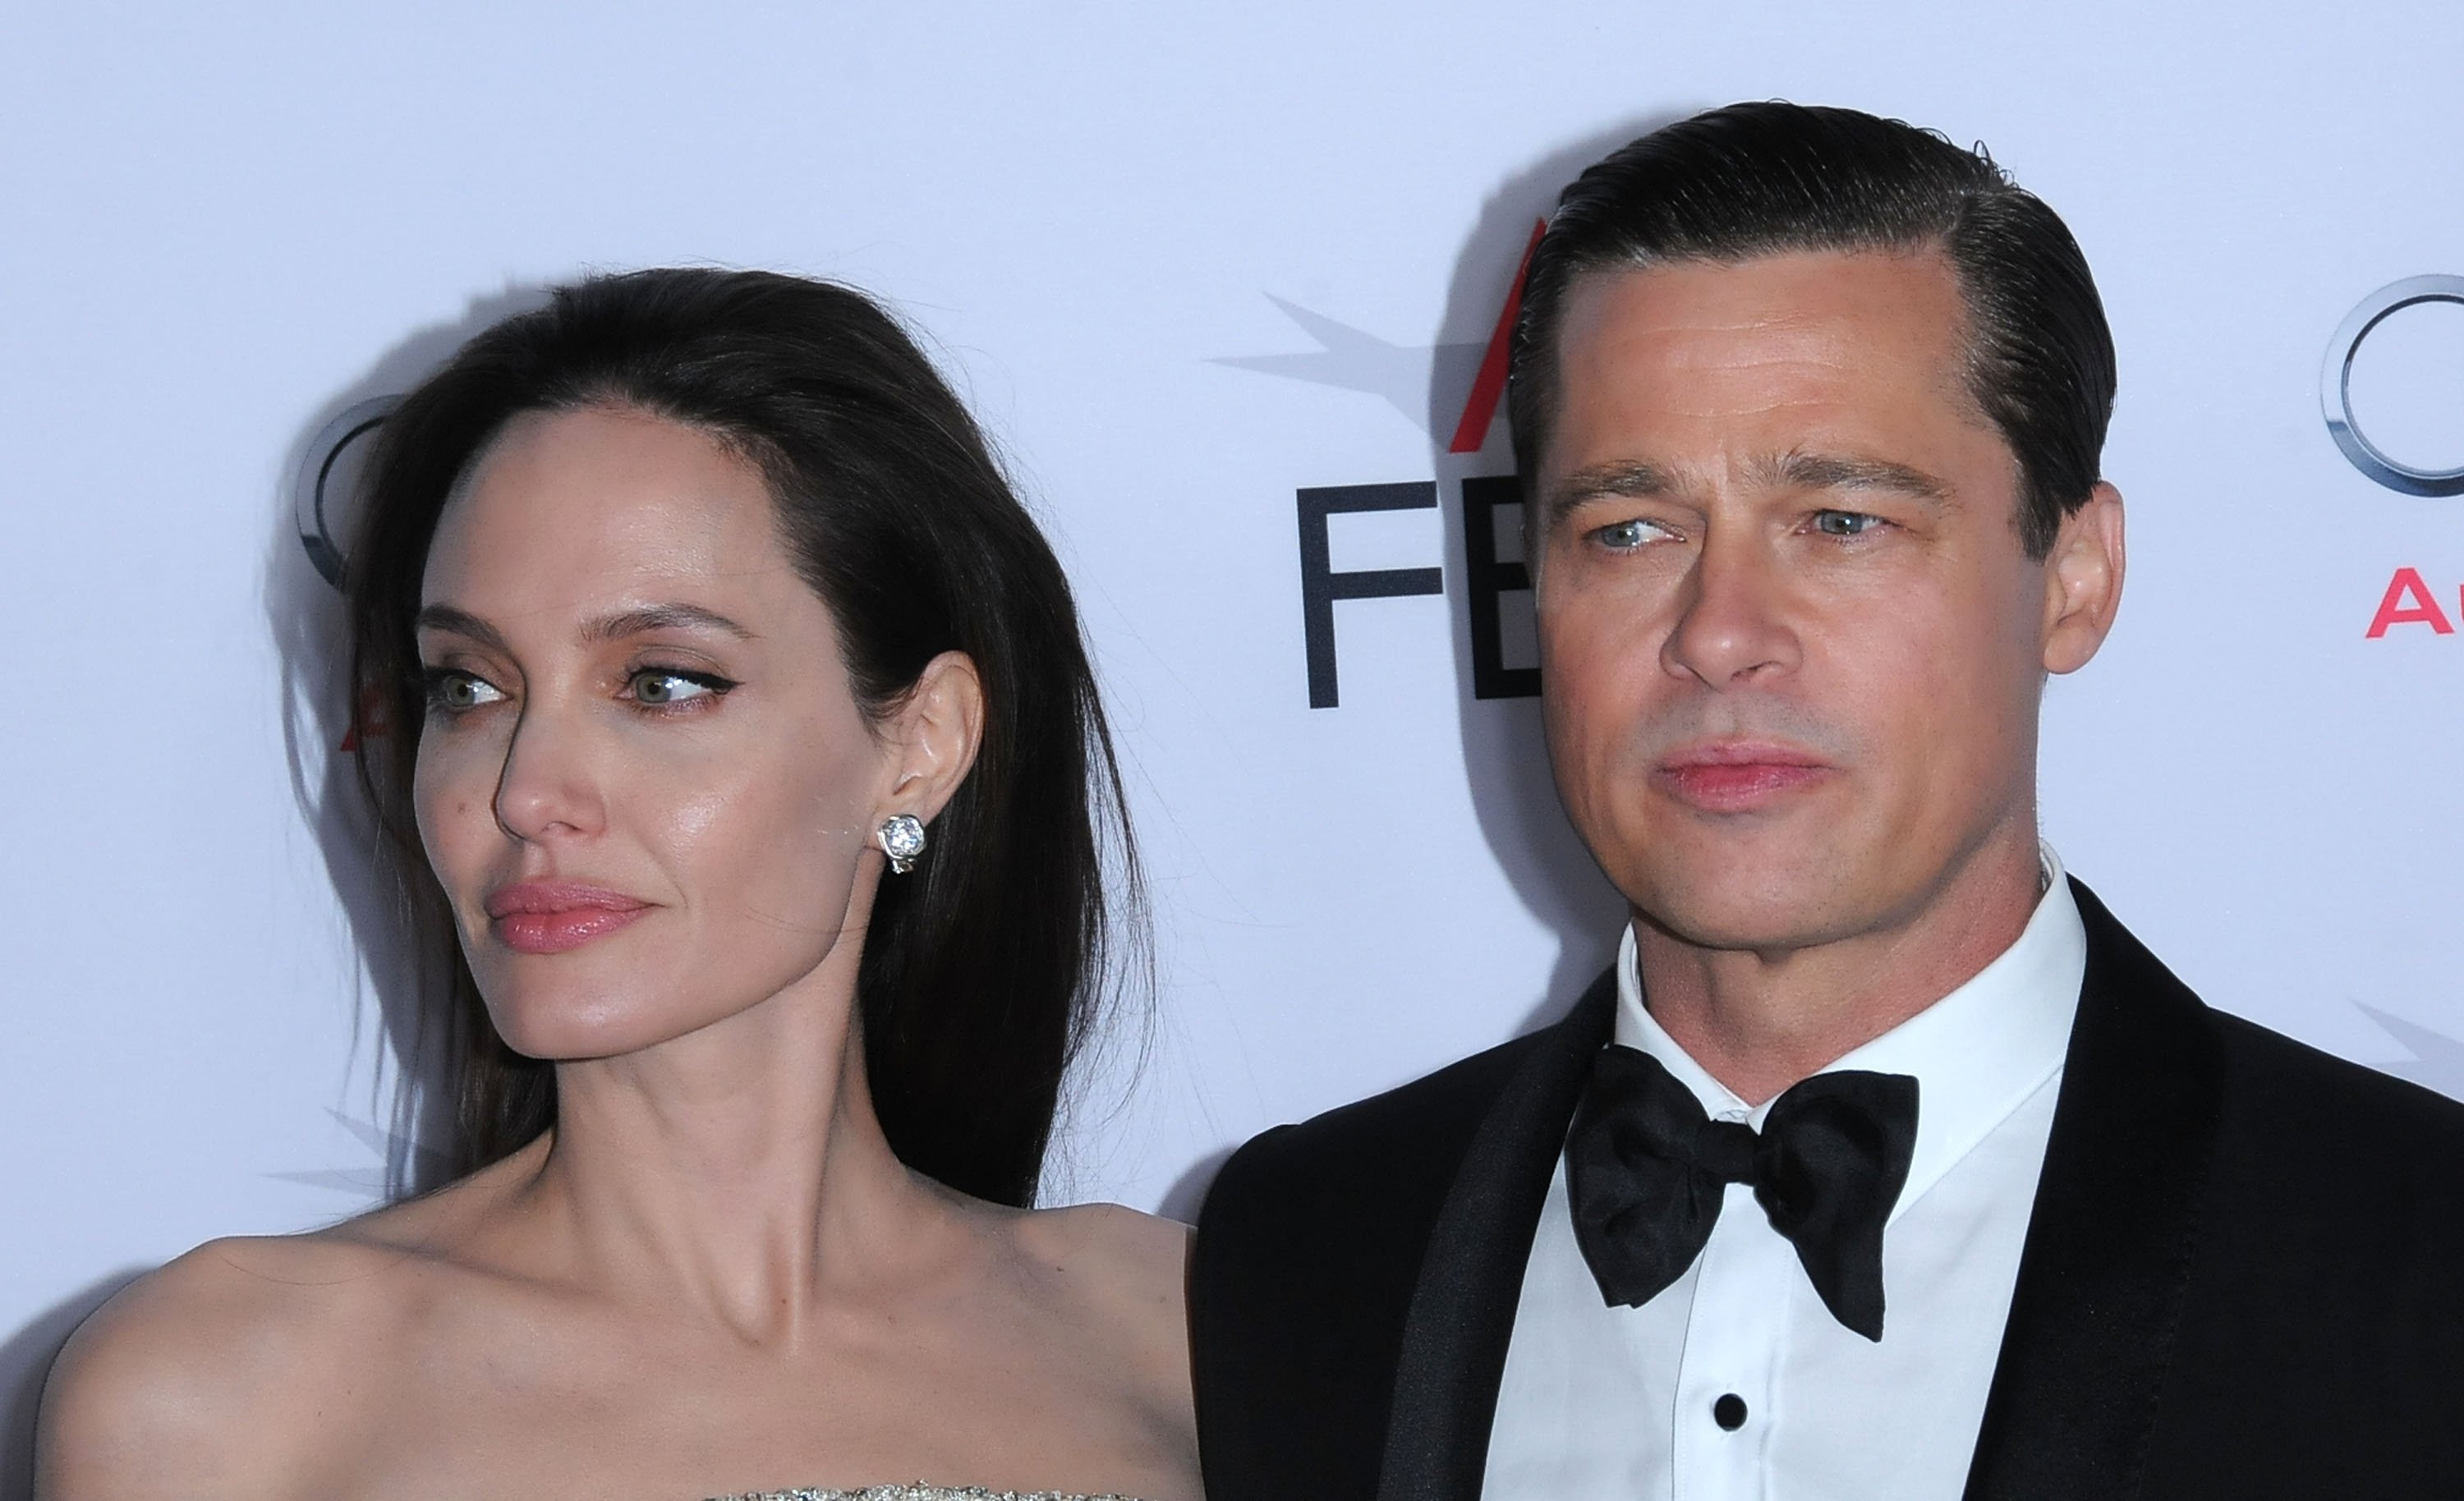  Actress Angelina Jolie and actor Brad Pitt arrive at AFI FEST 2015 Presented By Audi Opening Night Gala Premiere Of Universal Pictures' 'By The Sea' at TCL Chinese 6 Theatres on November 5, 2015. | Source: Getty Images